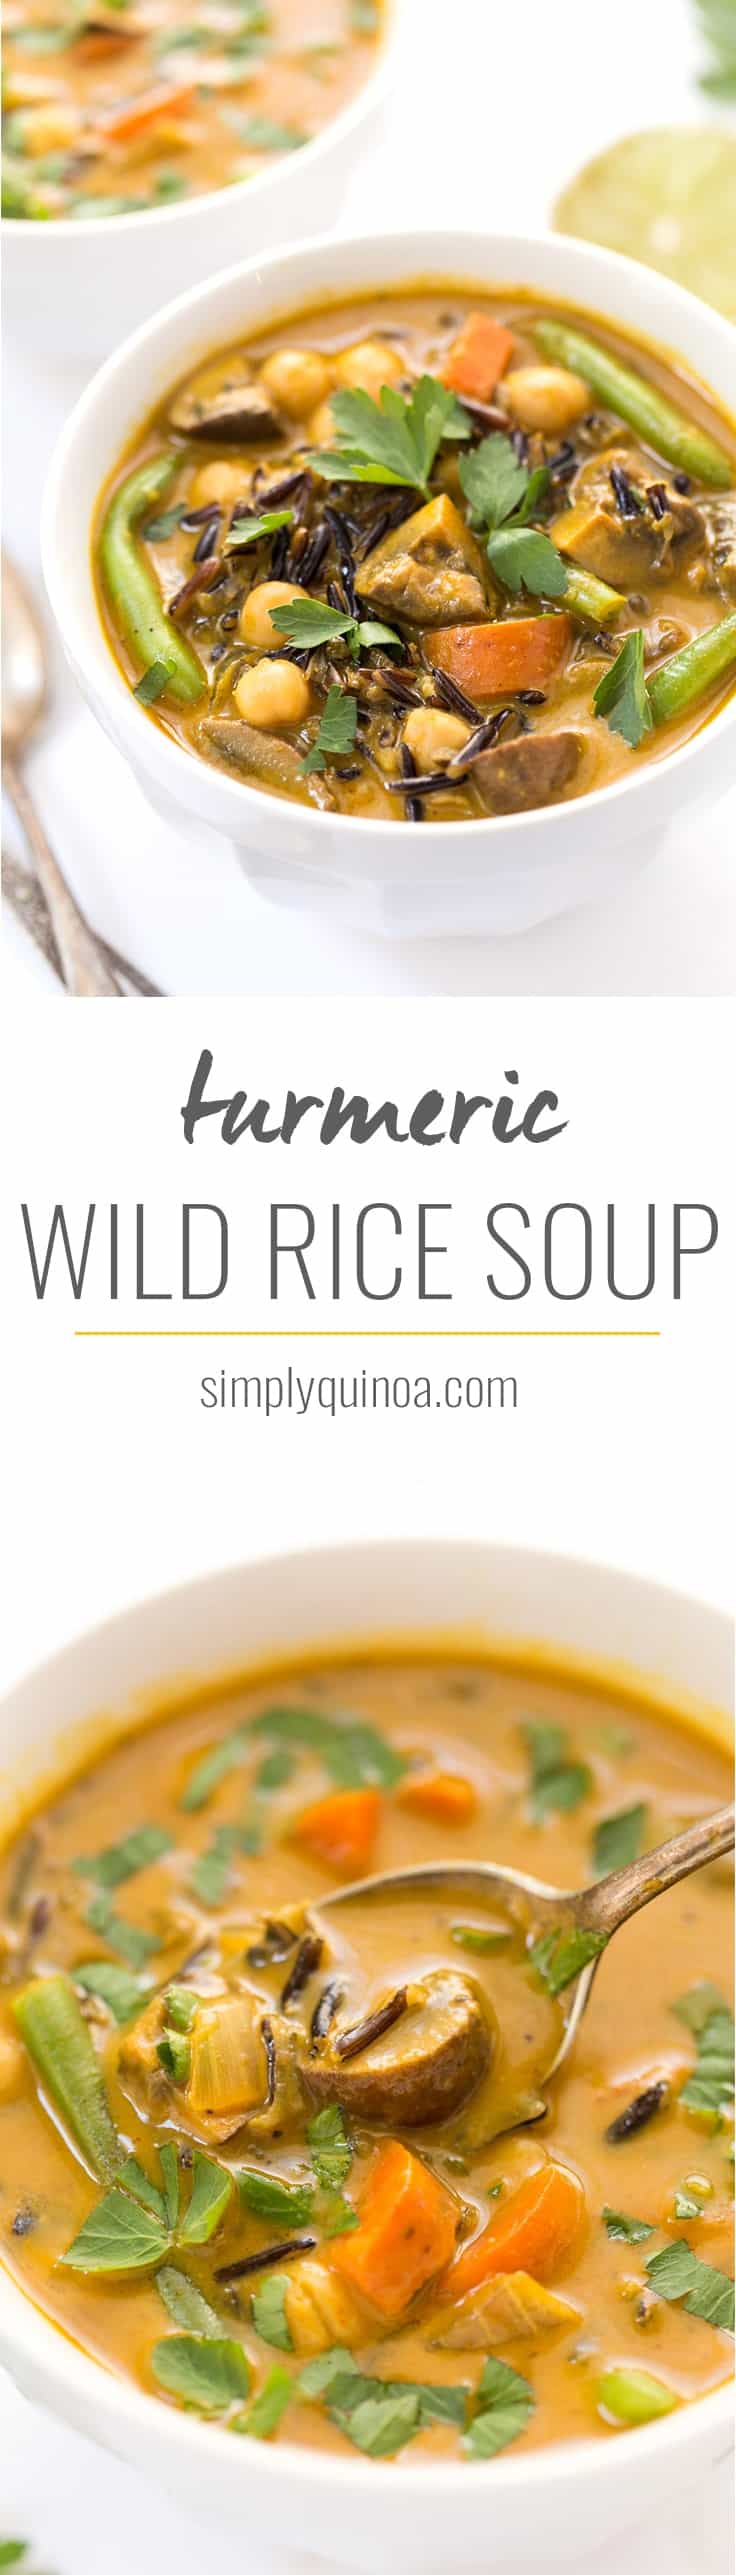 This ultra creamy coconut and turmeric wild rice soup is vegan and is packed with veggies. Makes for an easy one-pot dinner and freezes well for leftovers!